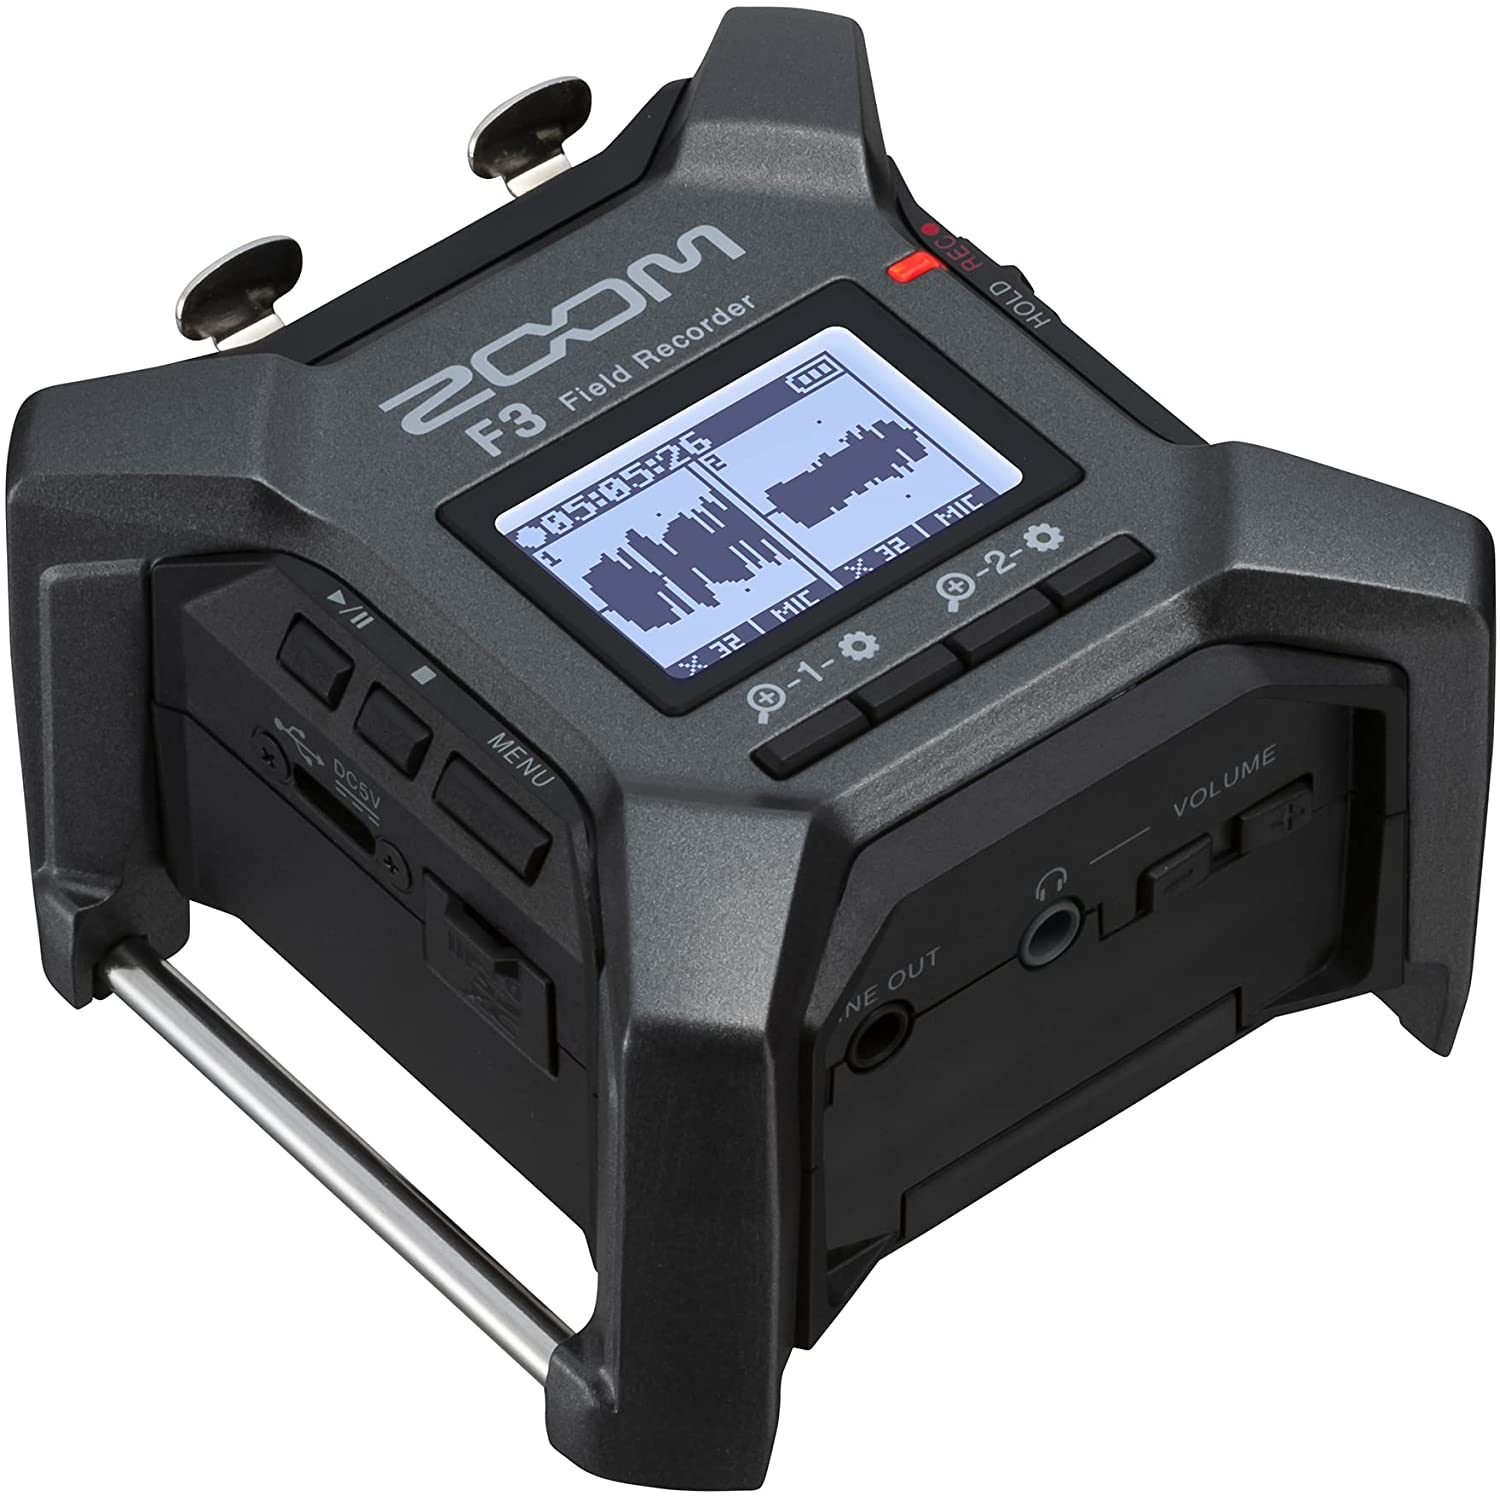 First look: Zoom F3 2-track 32-bit float recorder with 48 kHz sampling rate 8